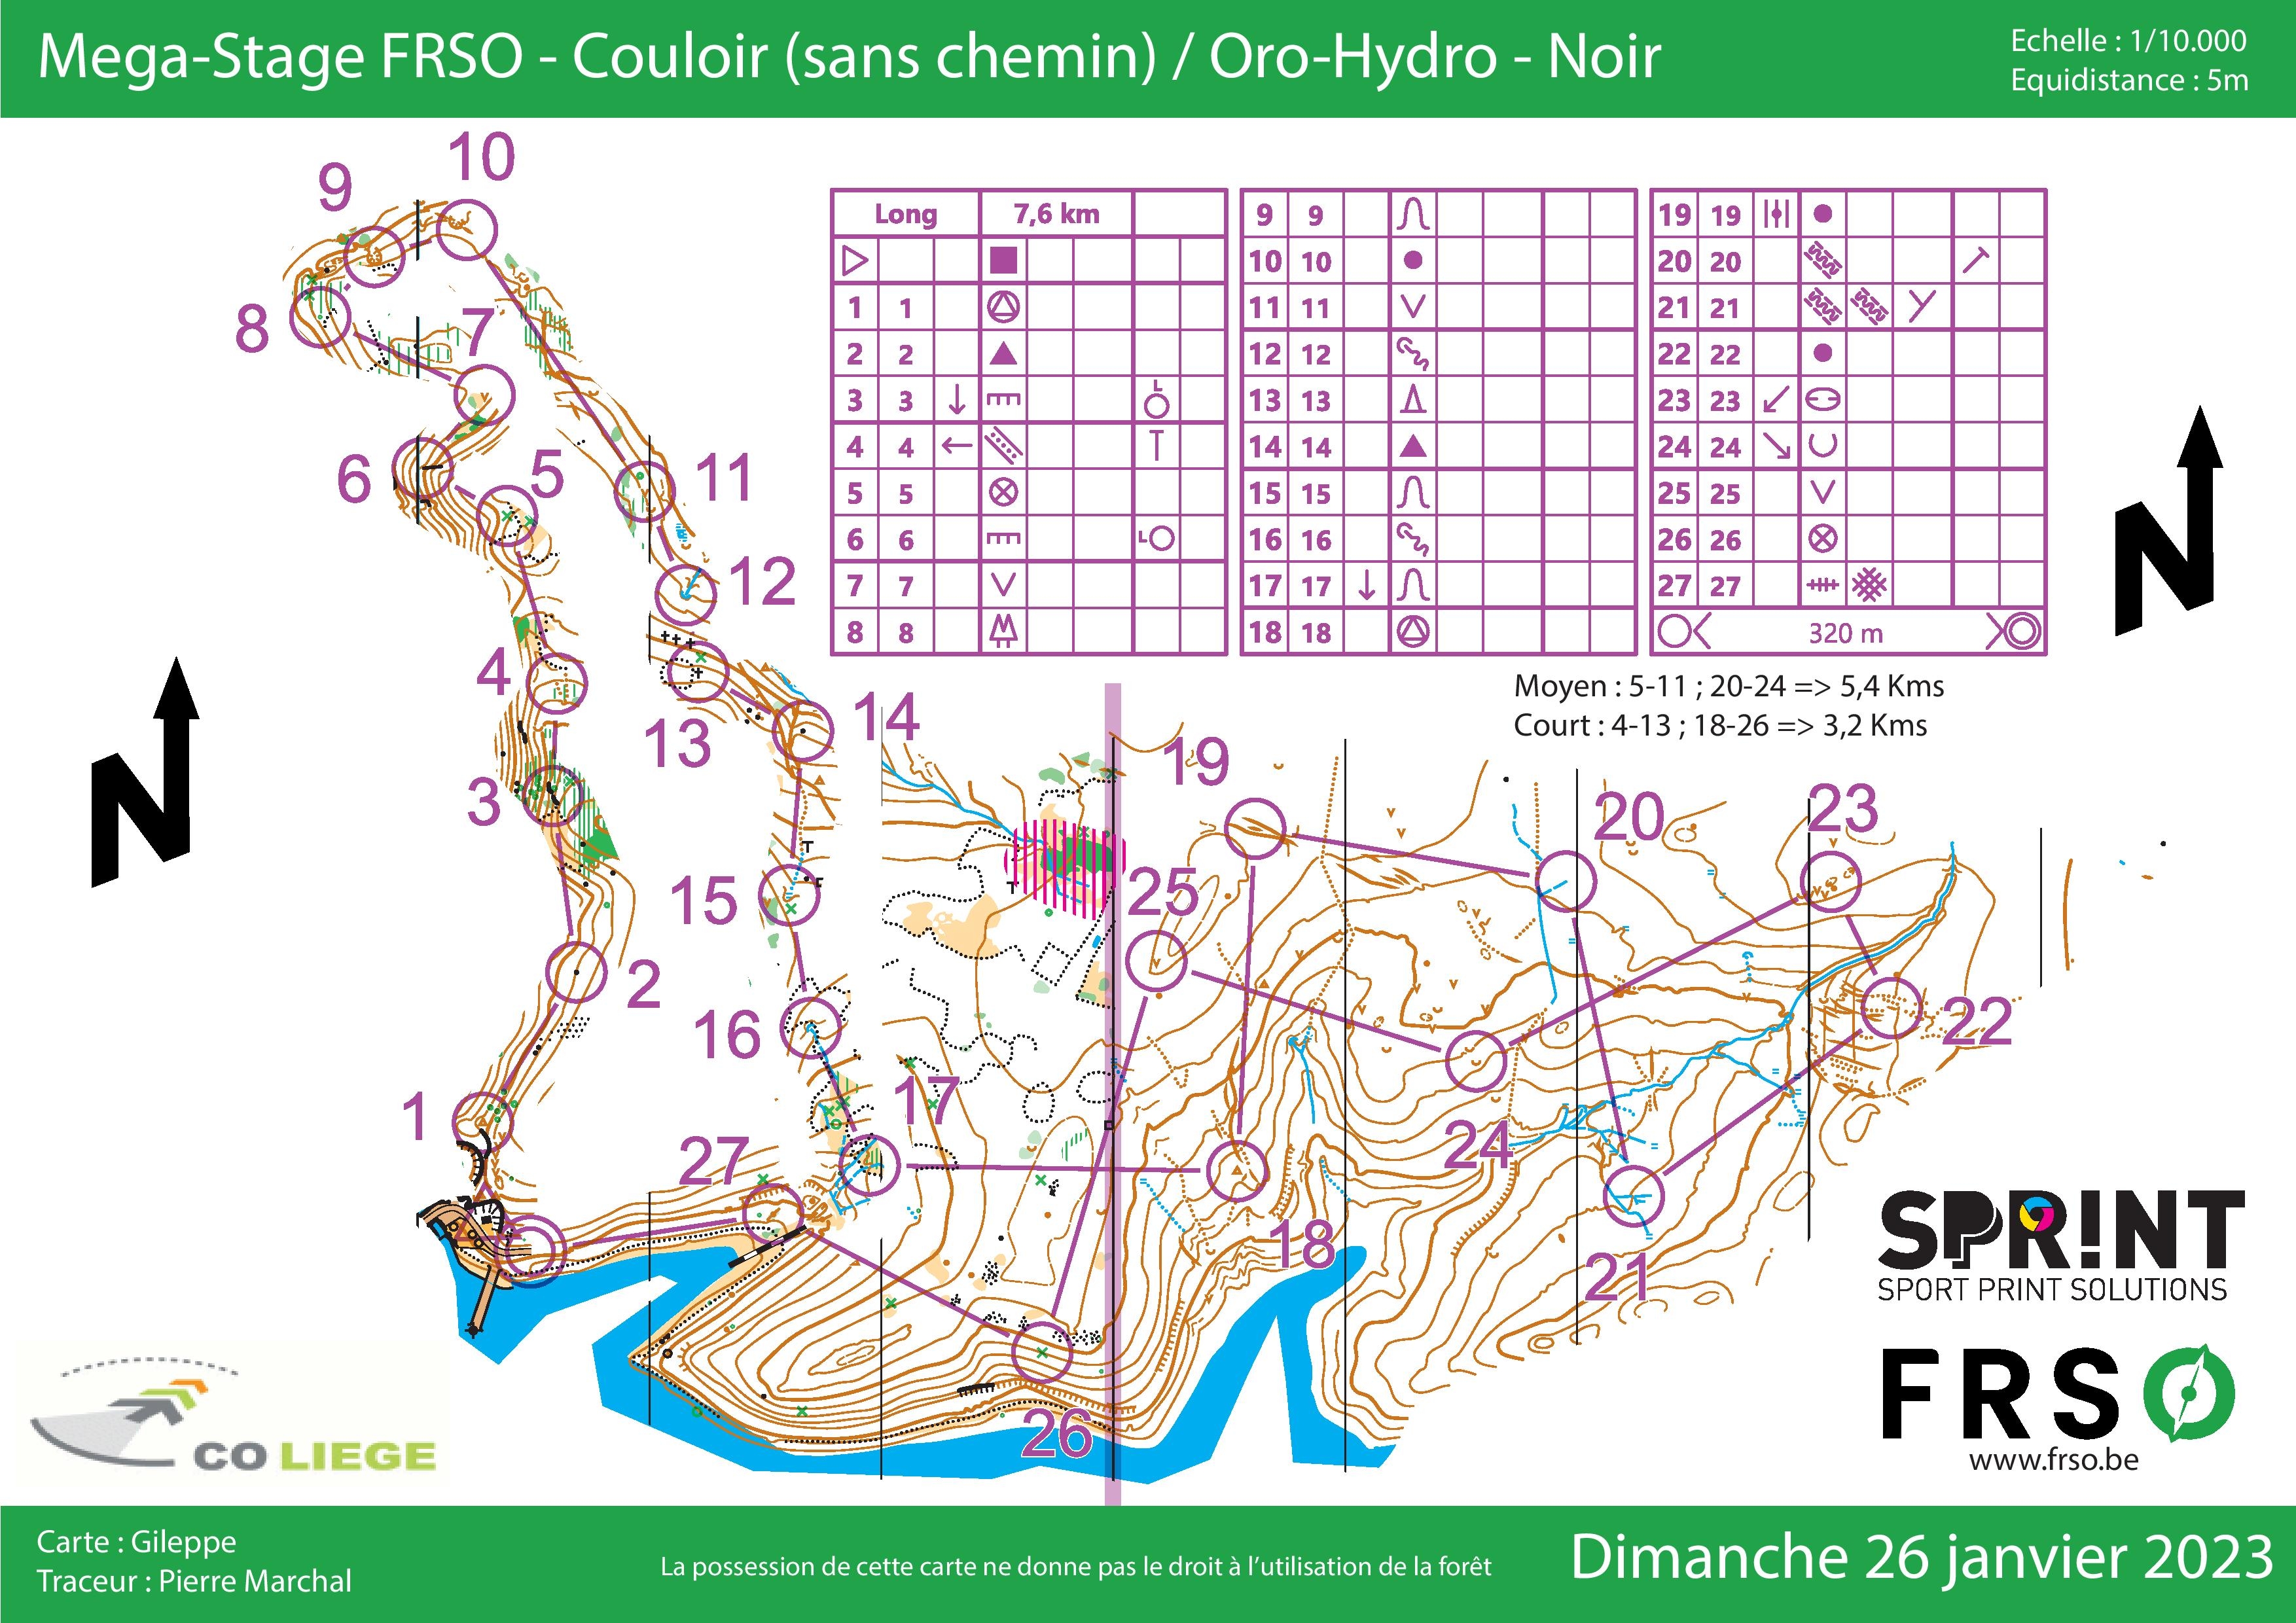 Mégastage FRSO - Couloir et Oro-hydro (26.02.2023)